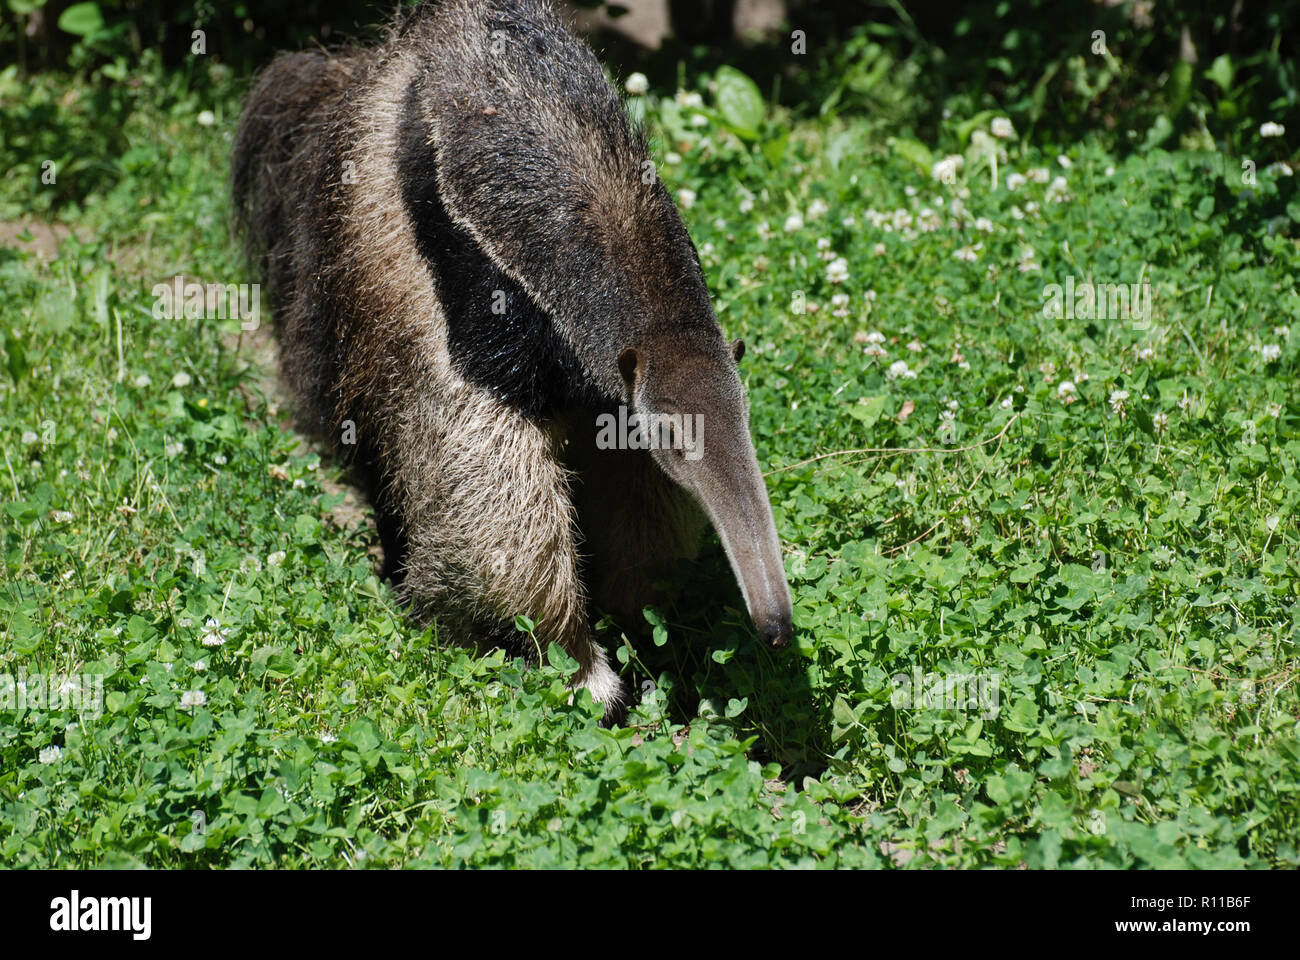 Giant anteater in a grassy area walking around. Stock Photo